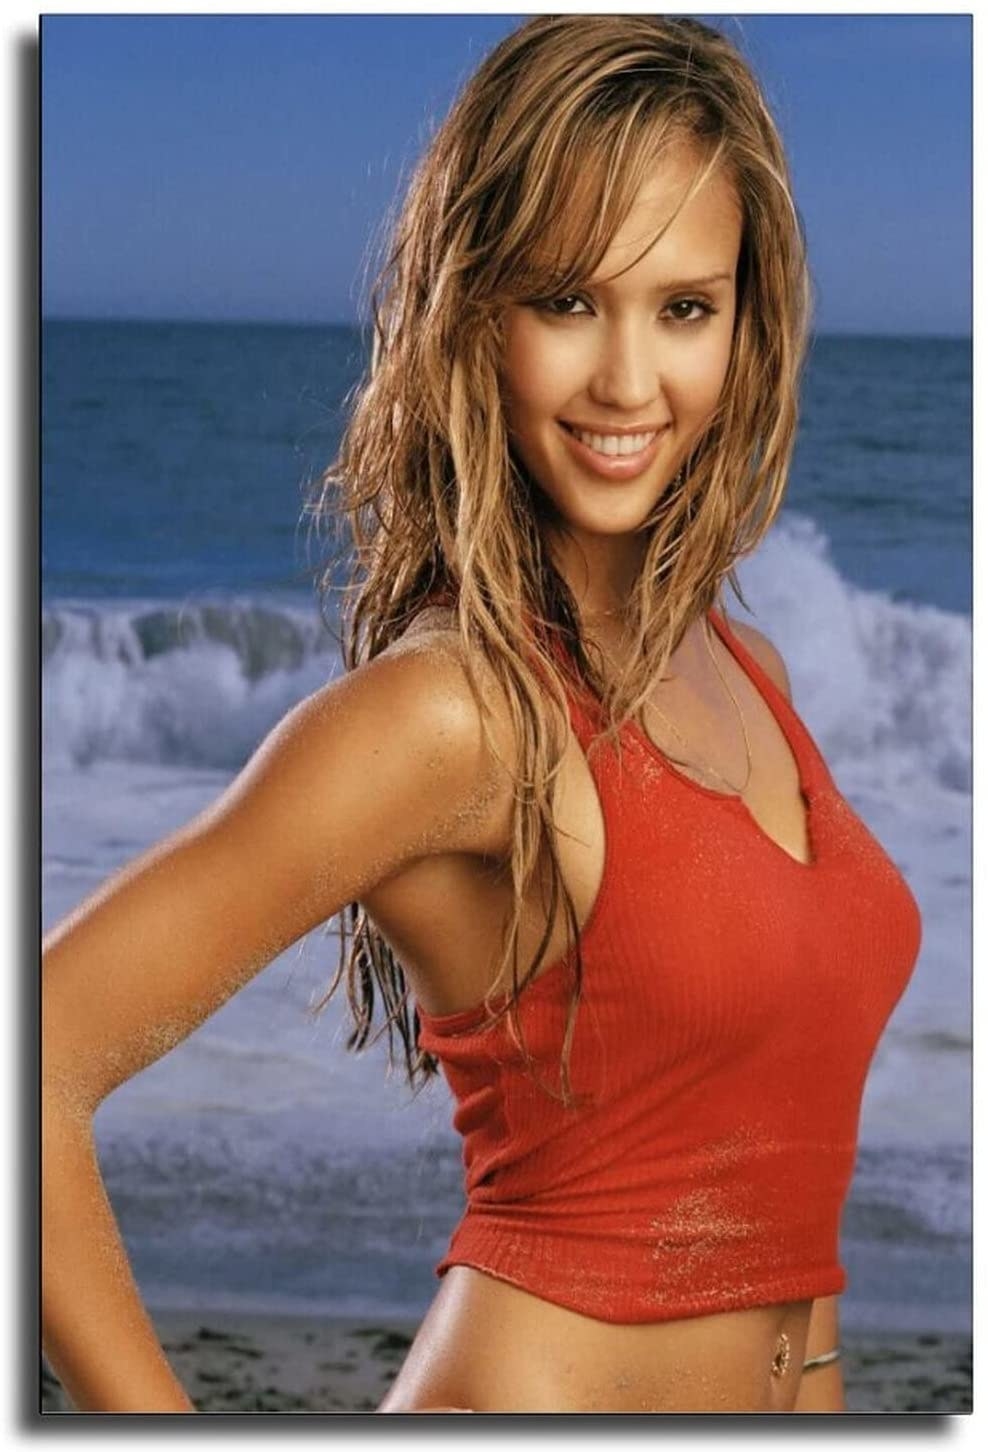 A picture of Jessica Alba at the beach